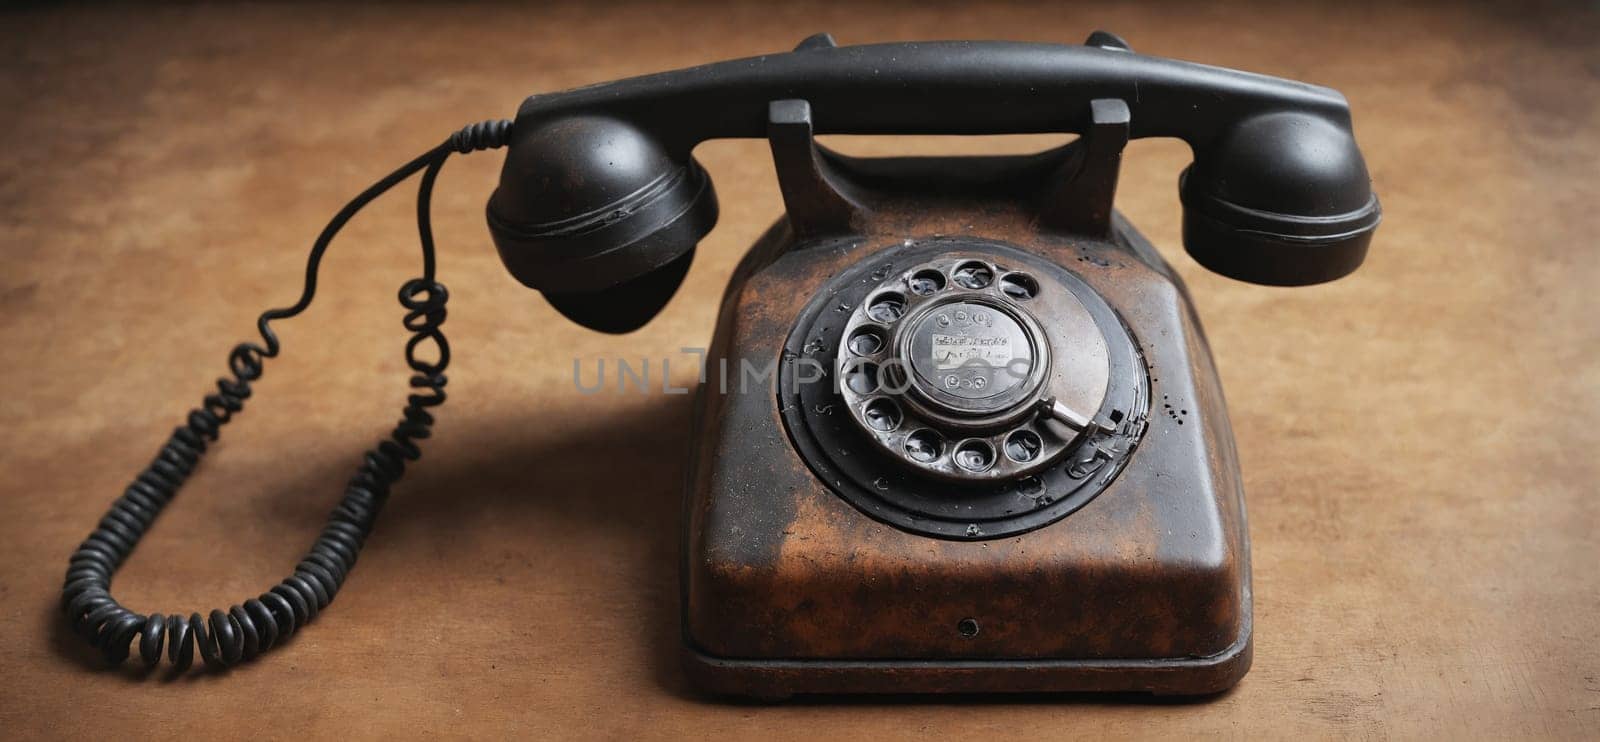 Retro Connection: Brown Rotary Dial Telephone on Wood by Andre1ns